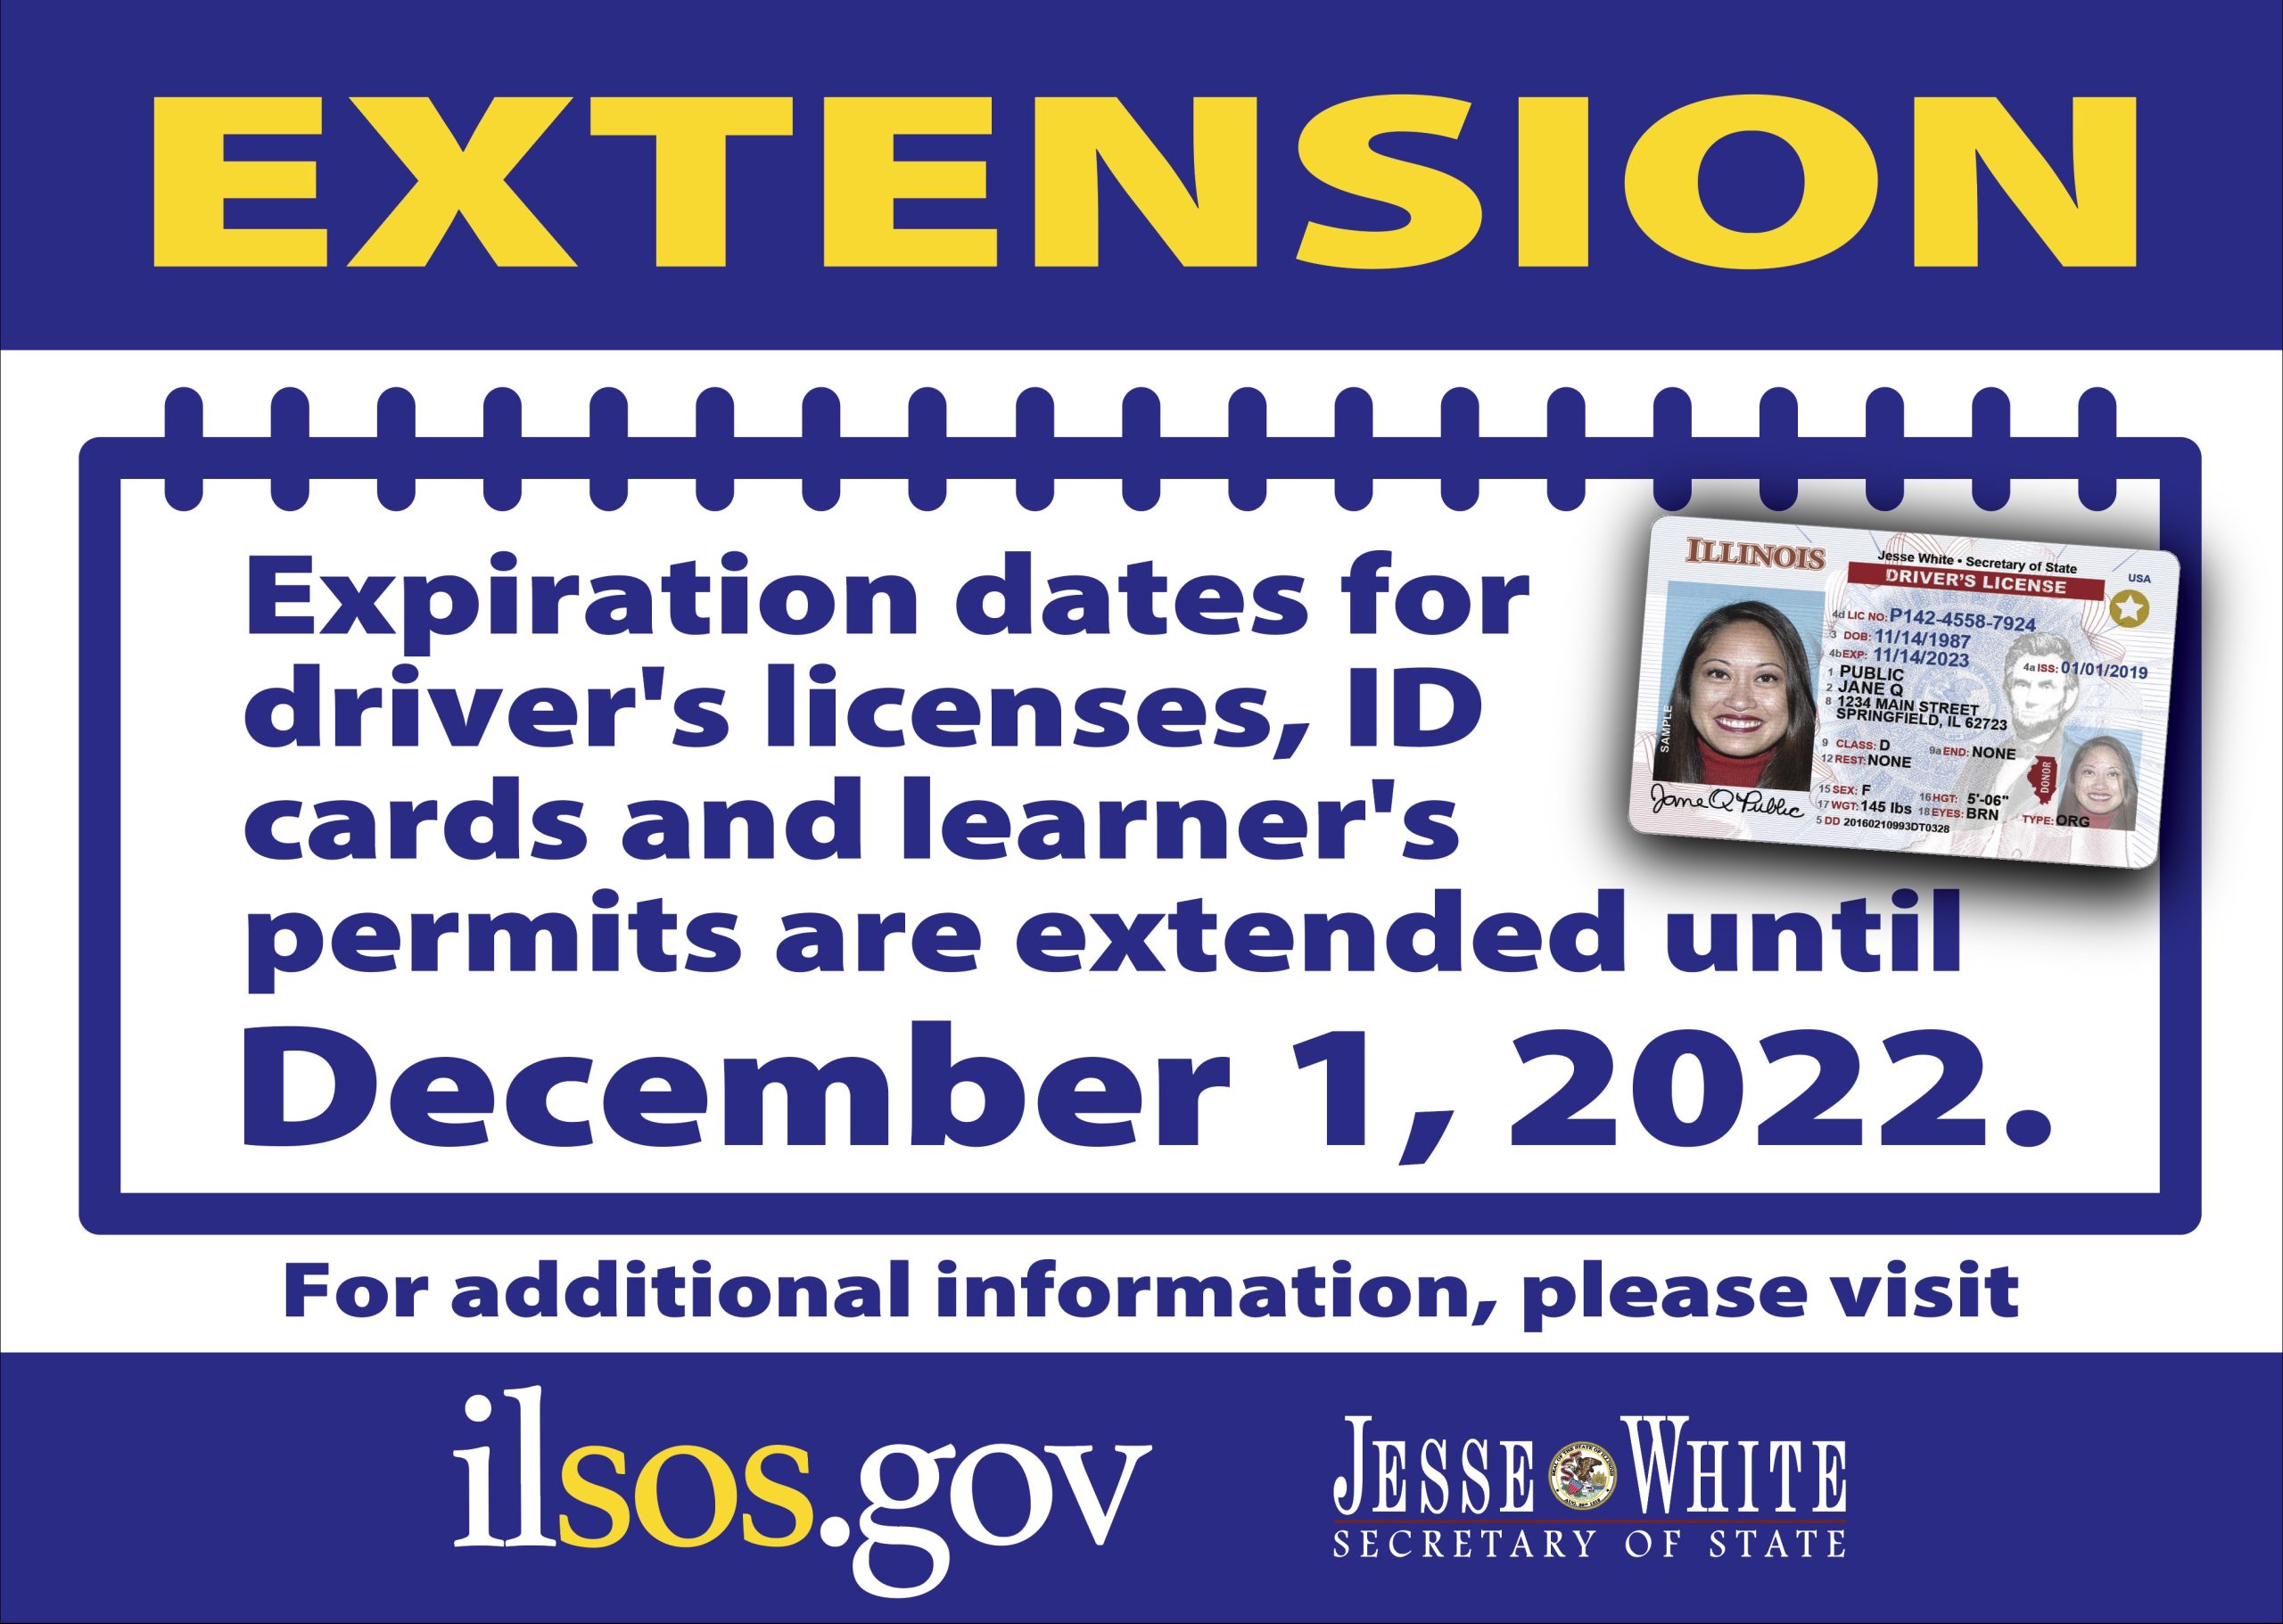 SOS Extends License Expiration Dates to December